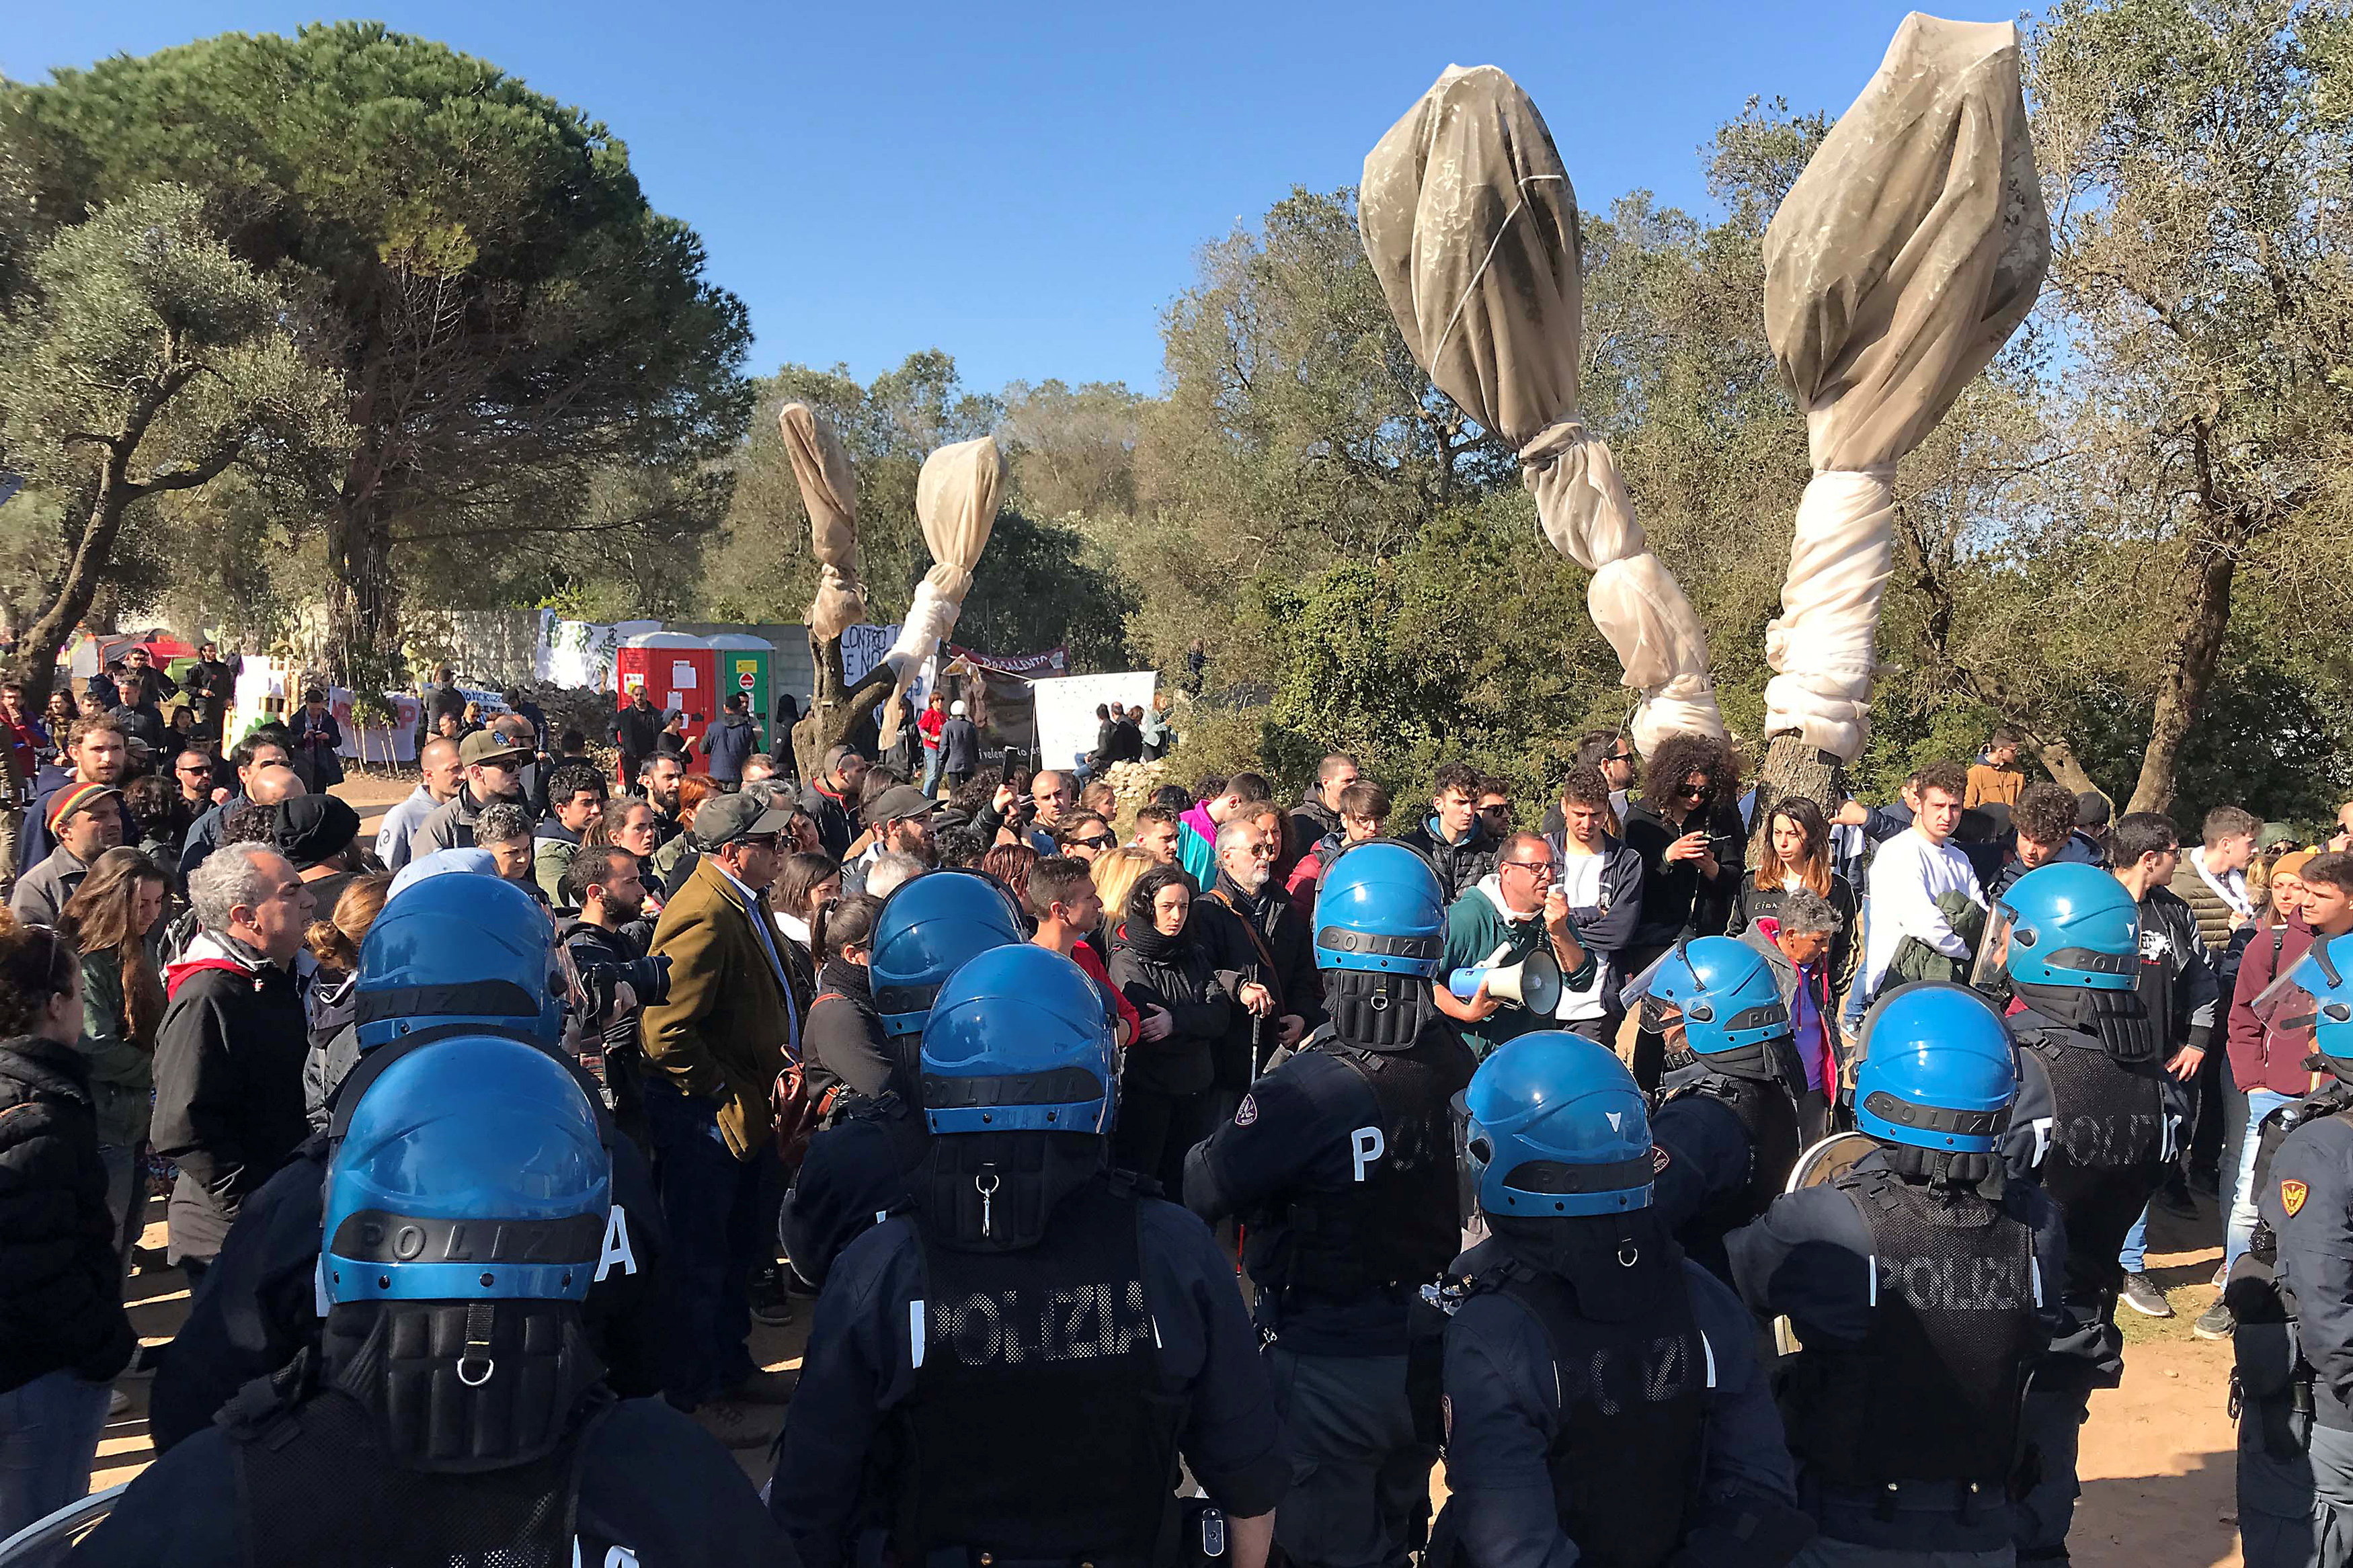 2017 03 28T164110Z 467108783 RC1634FD1670 RTRMADP 3 ITALY TAP PROTEST